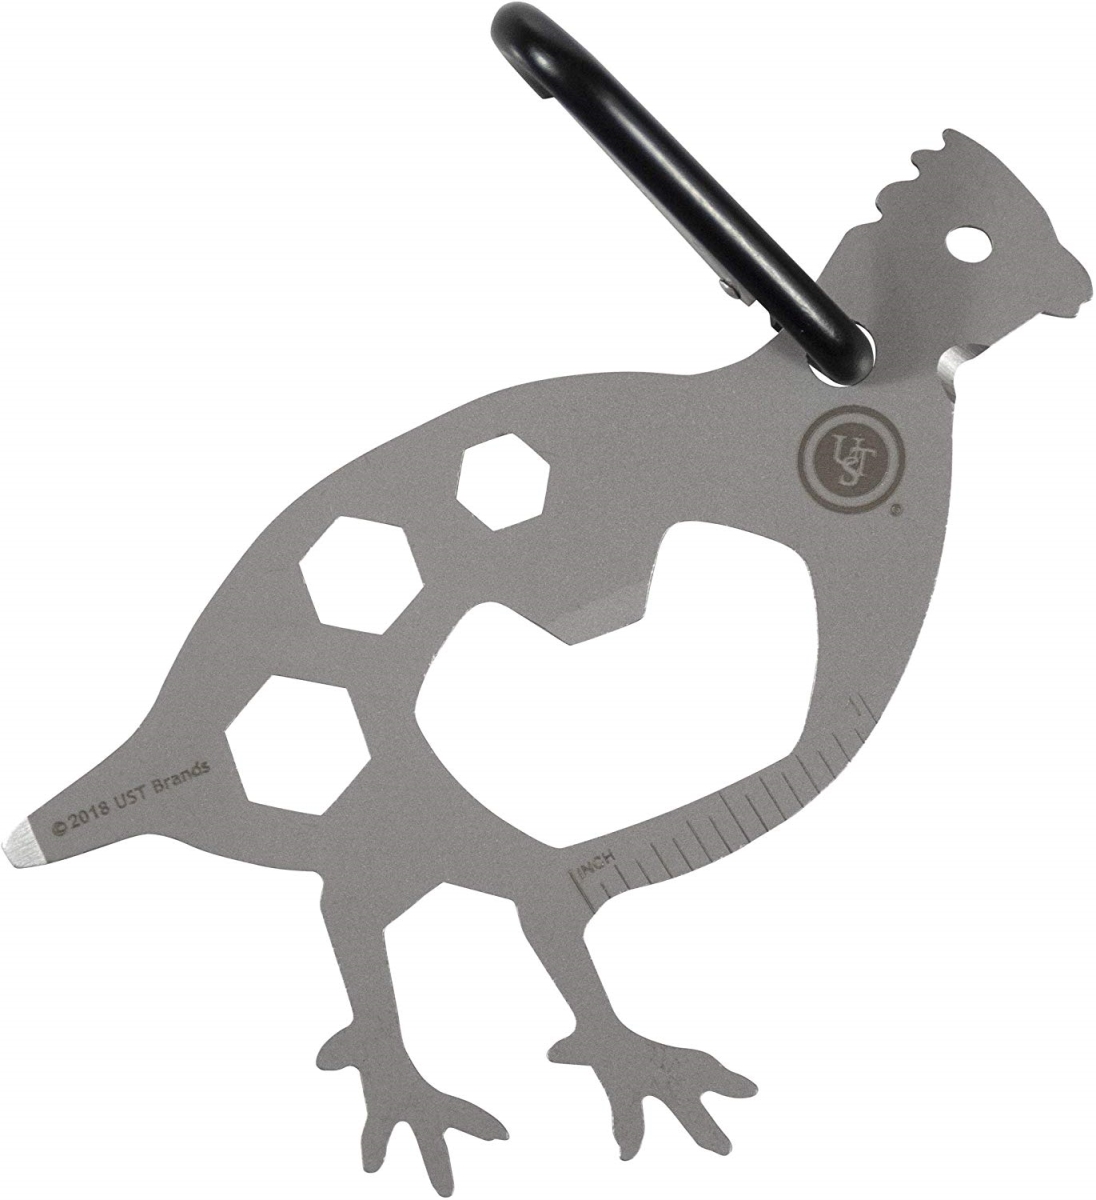 Picture of UST Brands UST-20-12464 2019 Bobwhite Quail Tool a Long Multi-Tools